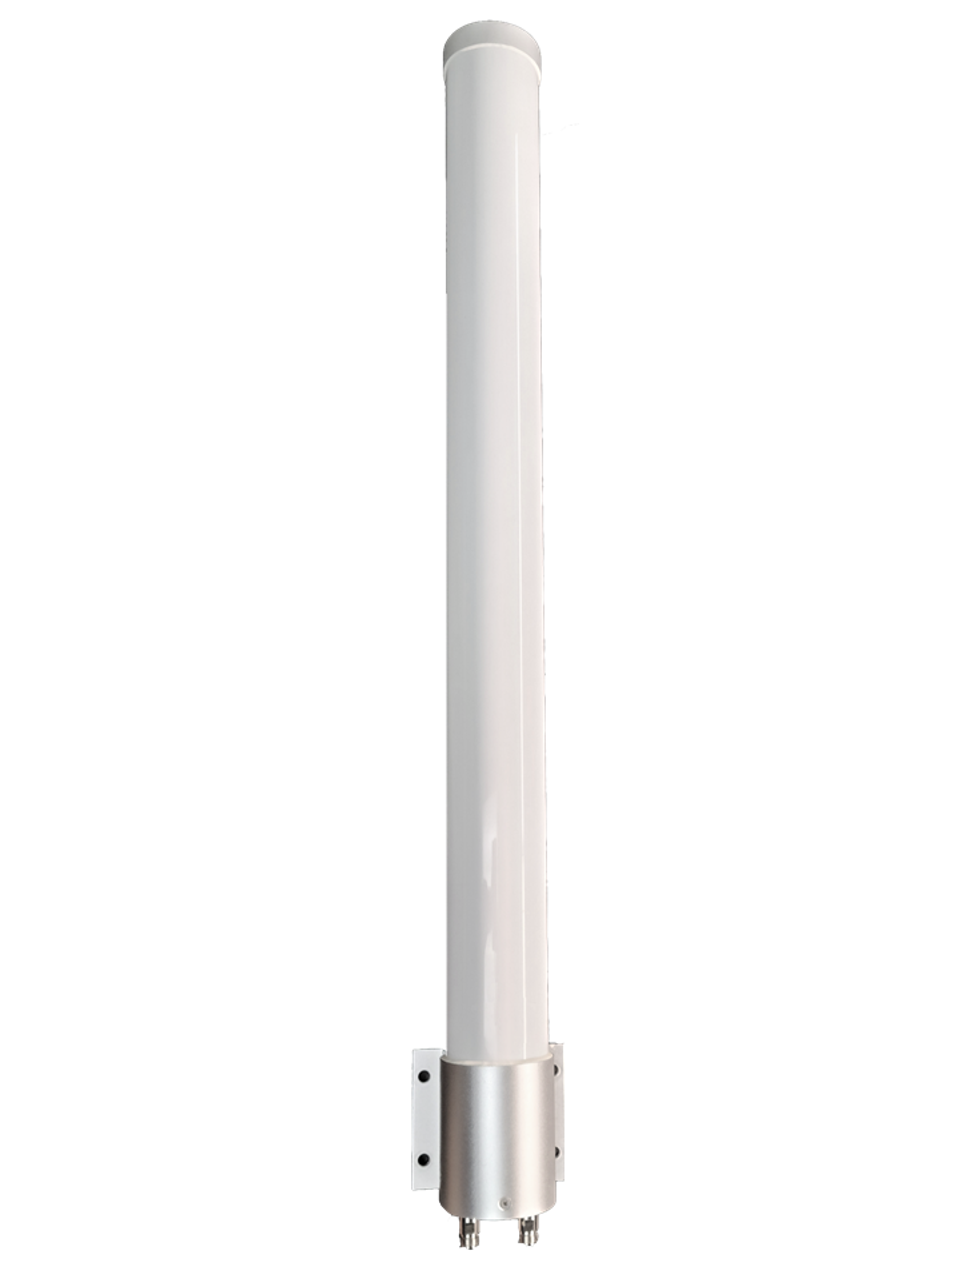 Inseego Wavemaker FX2000 FG2000 5G Router Antenna - M39 Omni Directional MIMO 2 x Cellular 4G LTE CBRS 5G NR Antenna w/Bracket Mount - 2 x N Female w/Coax Cable Options